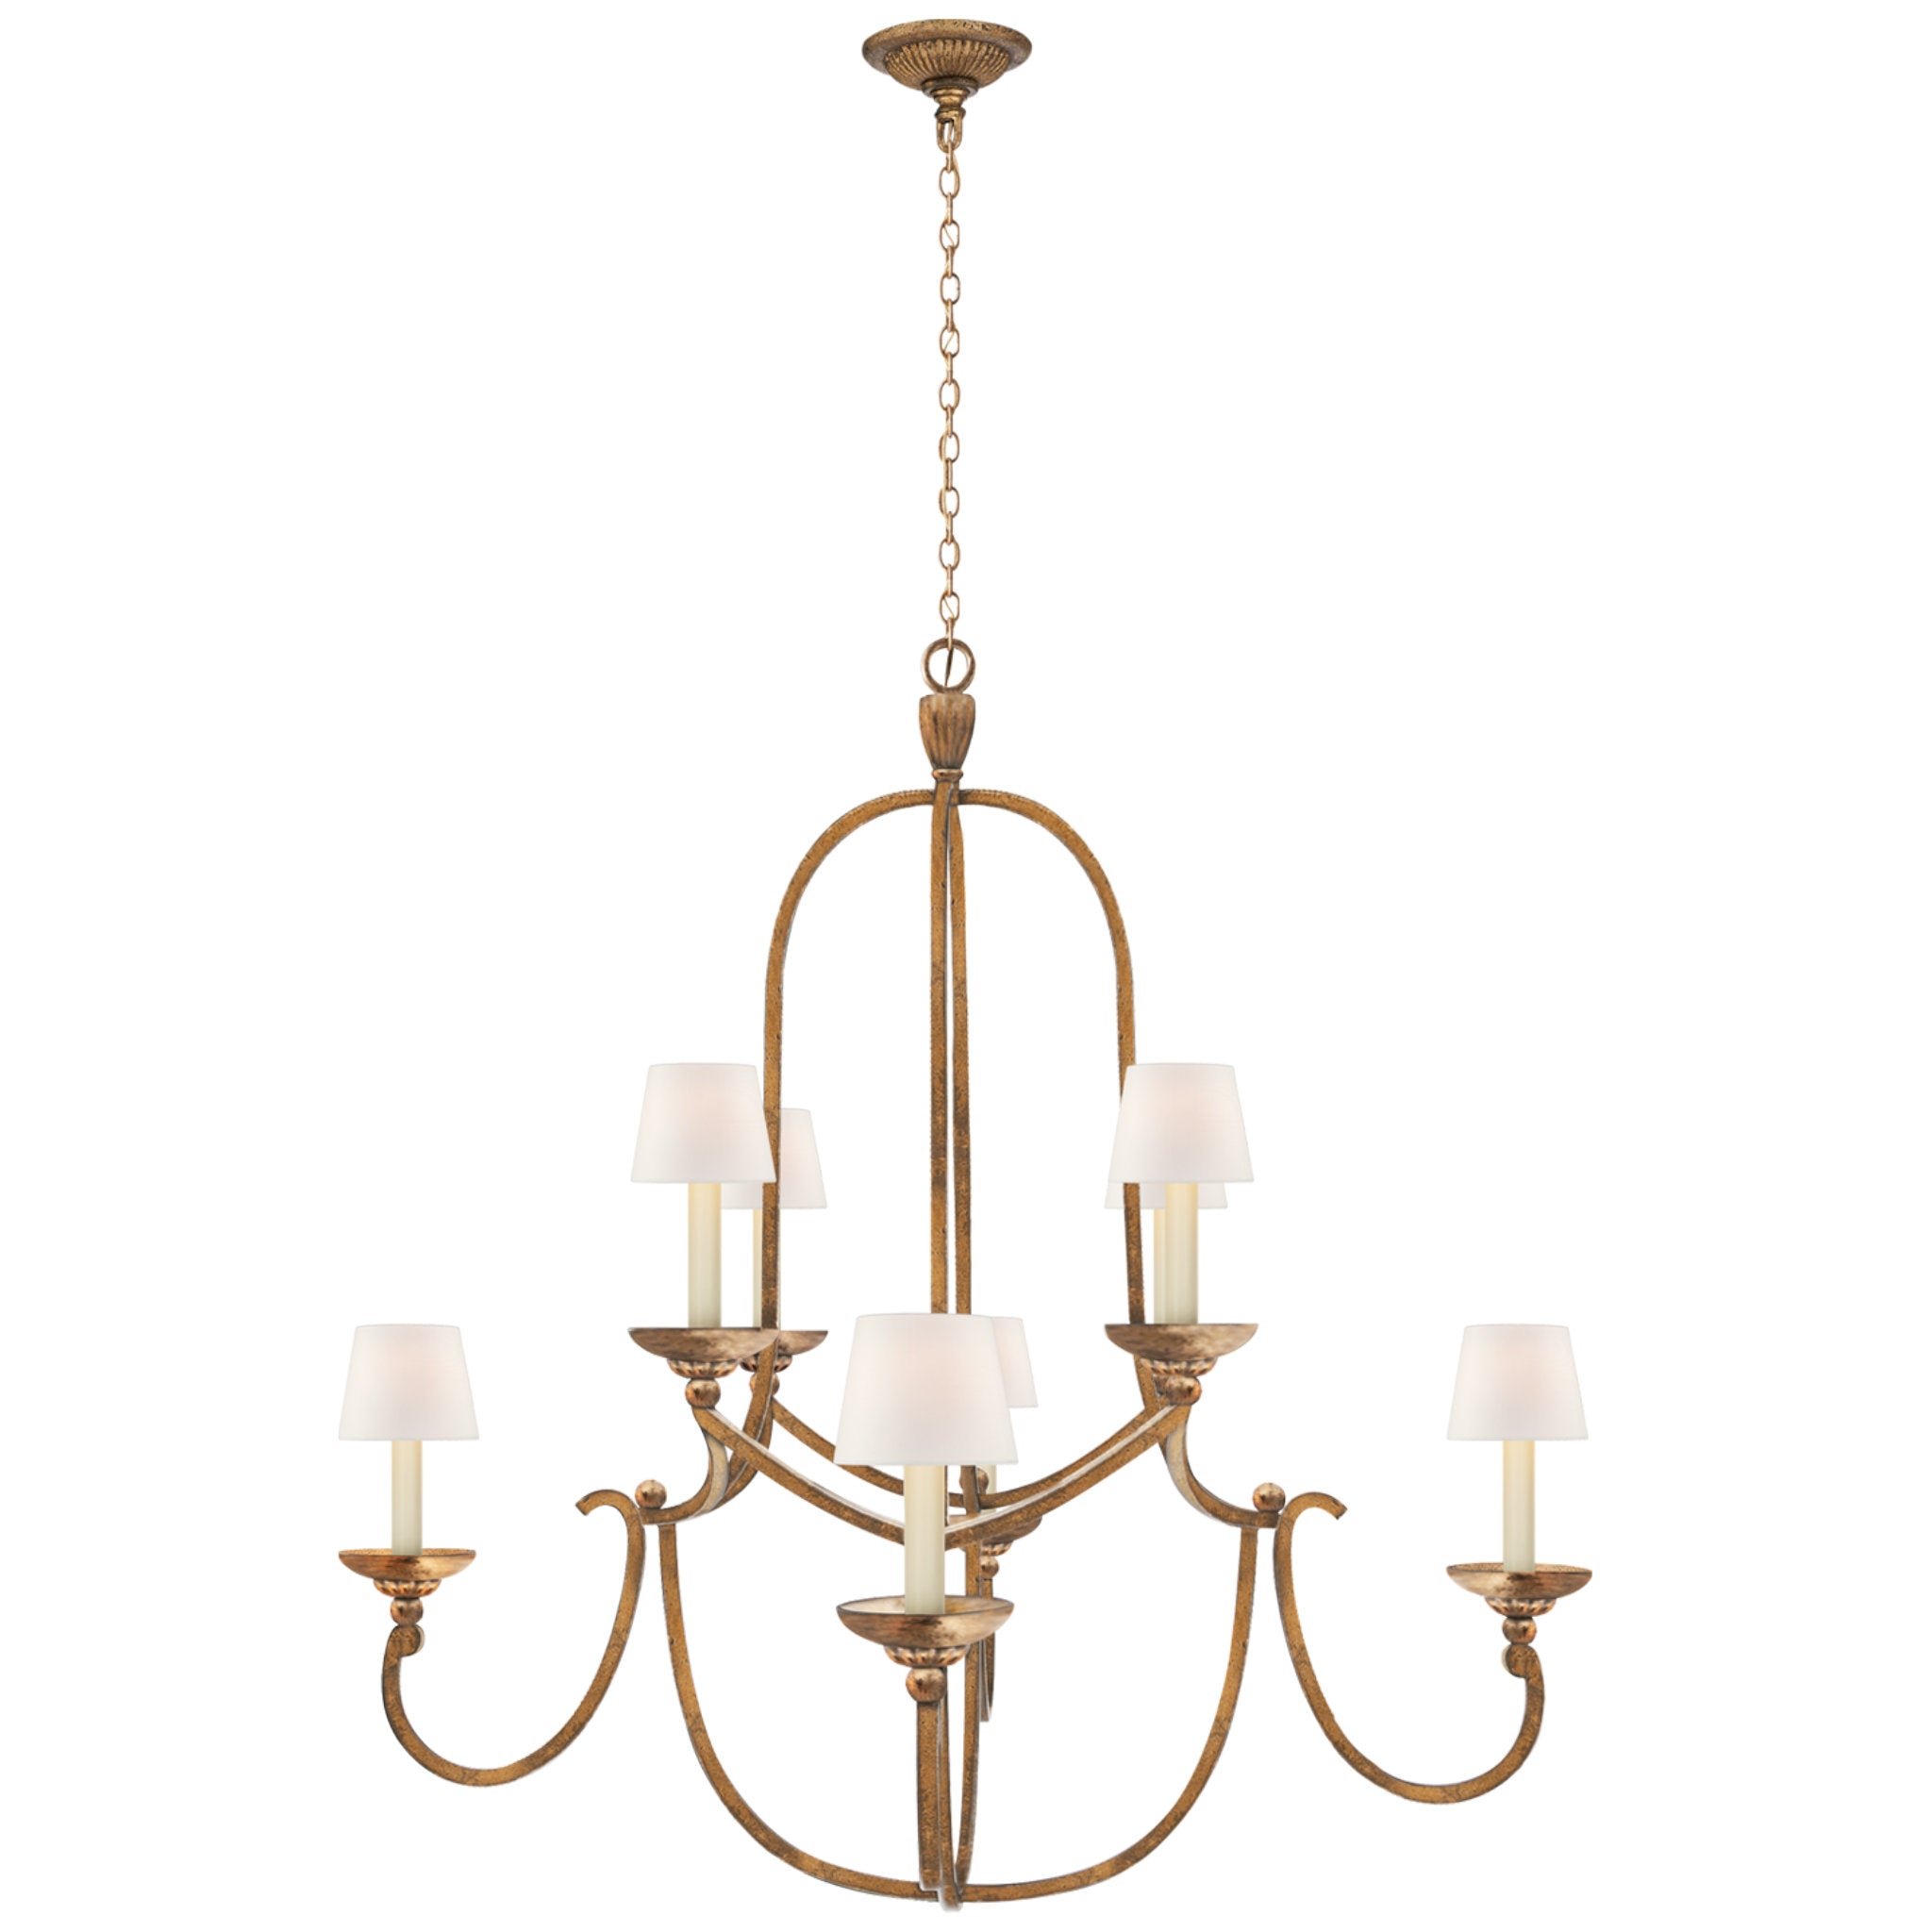 Chapman & Myers Flemish Medium Round Chandelier in Gilded Iron with Linen Shades